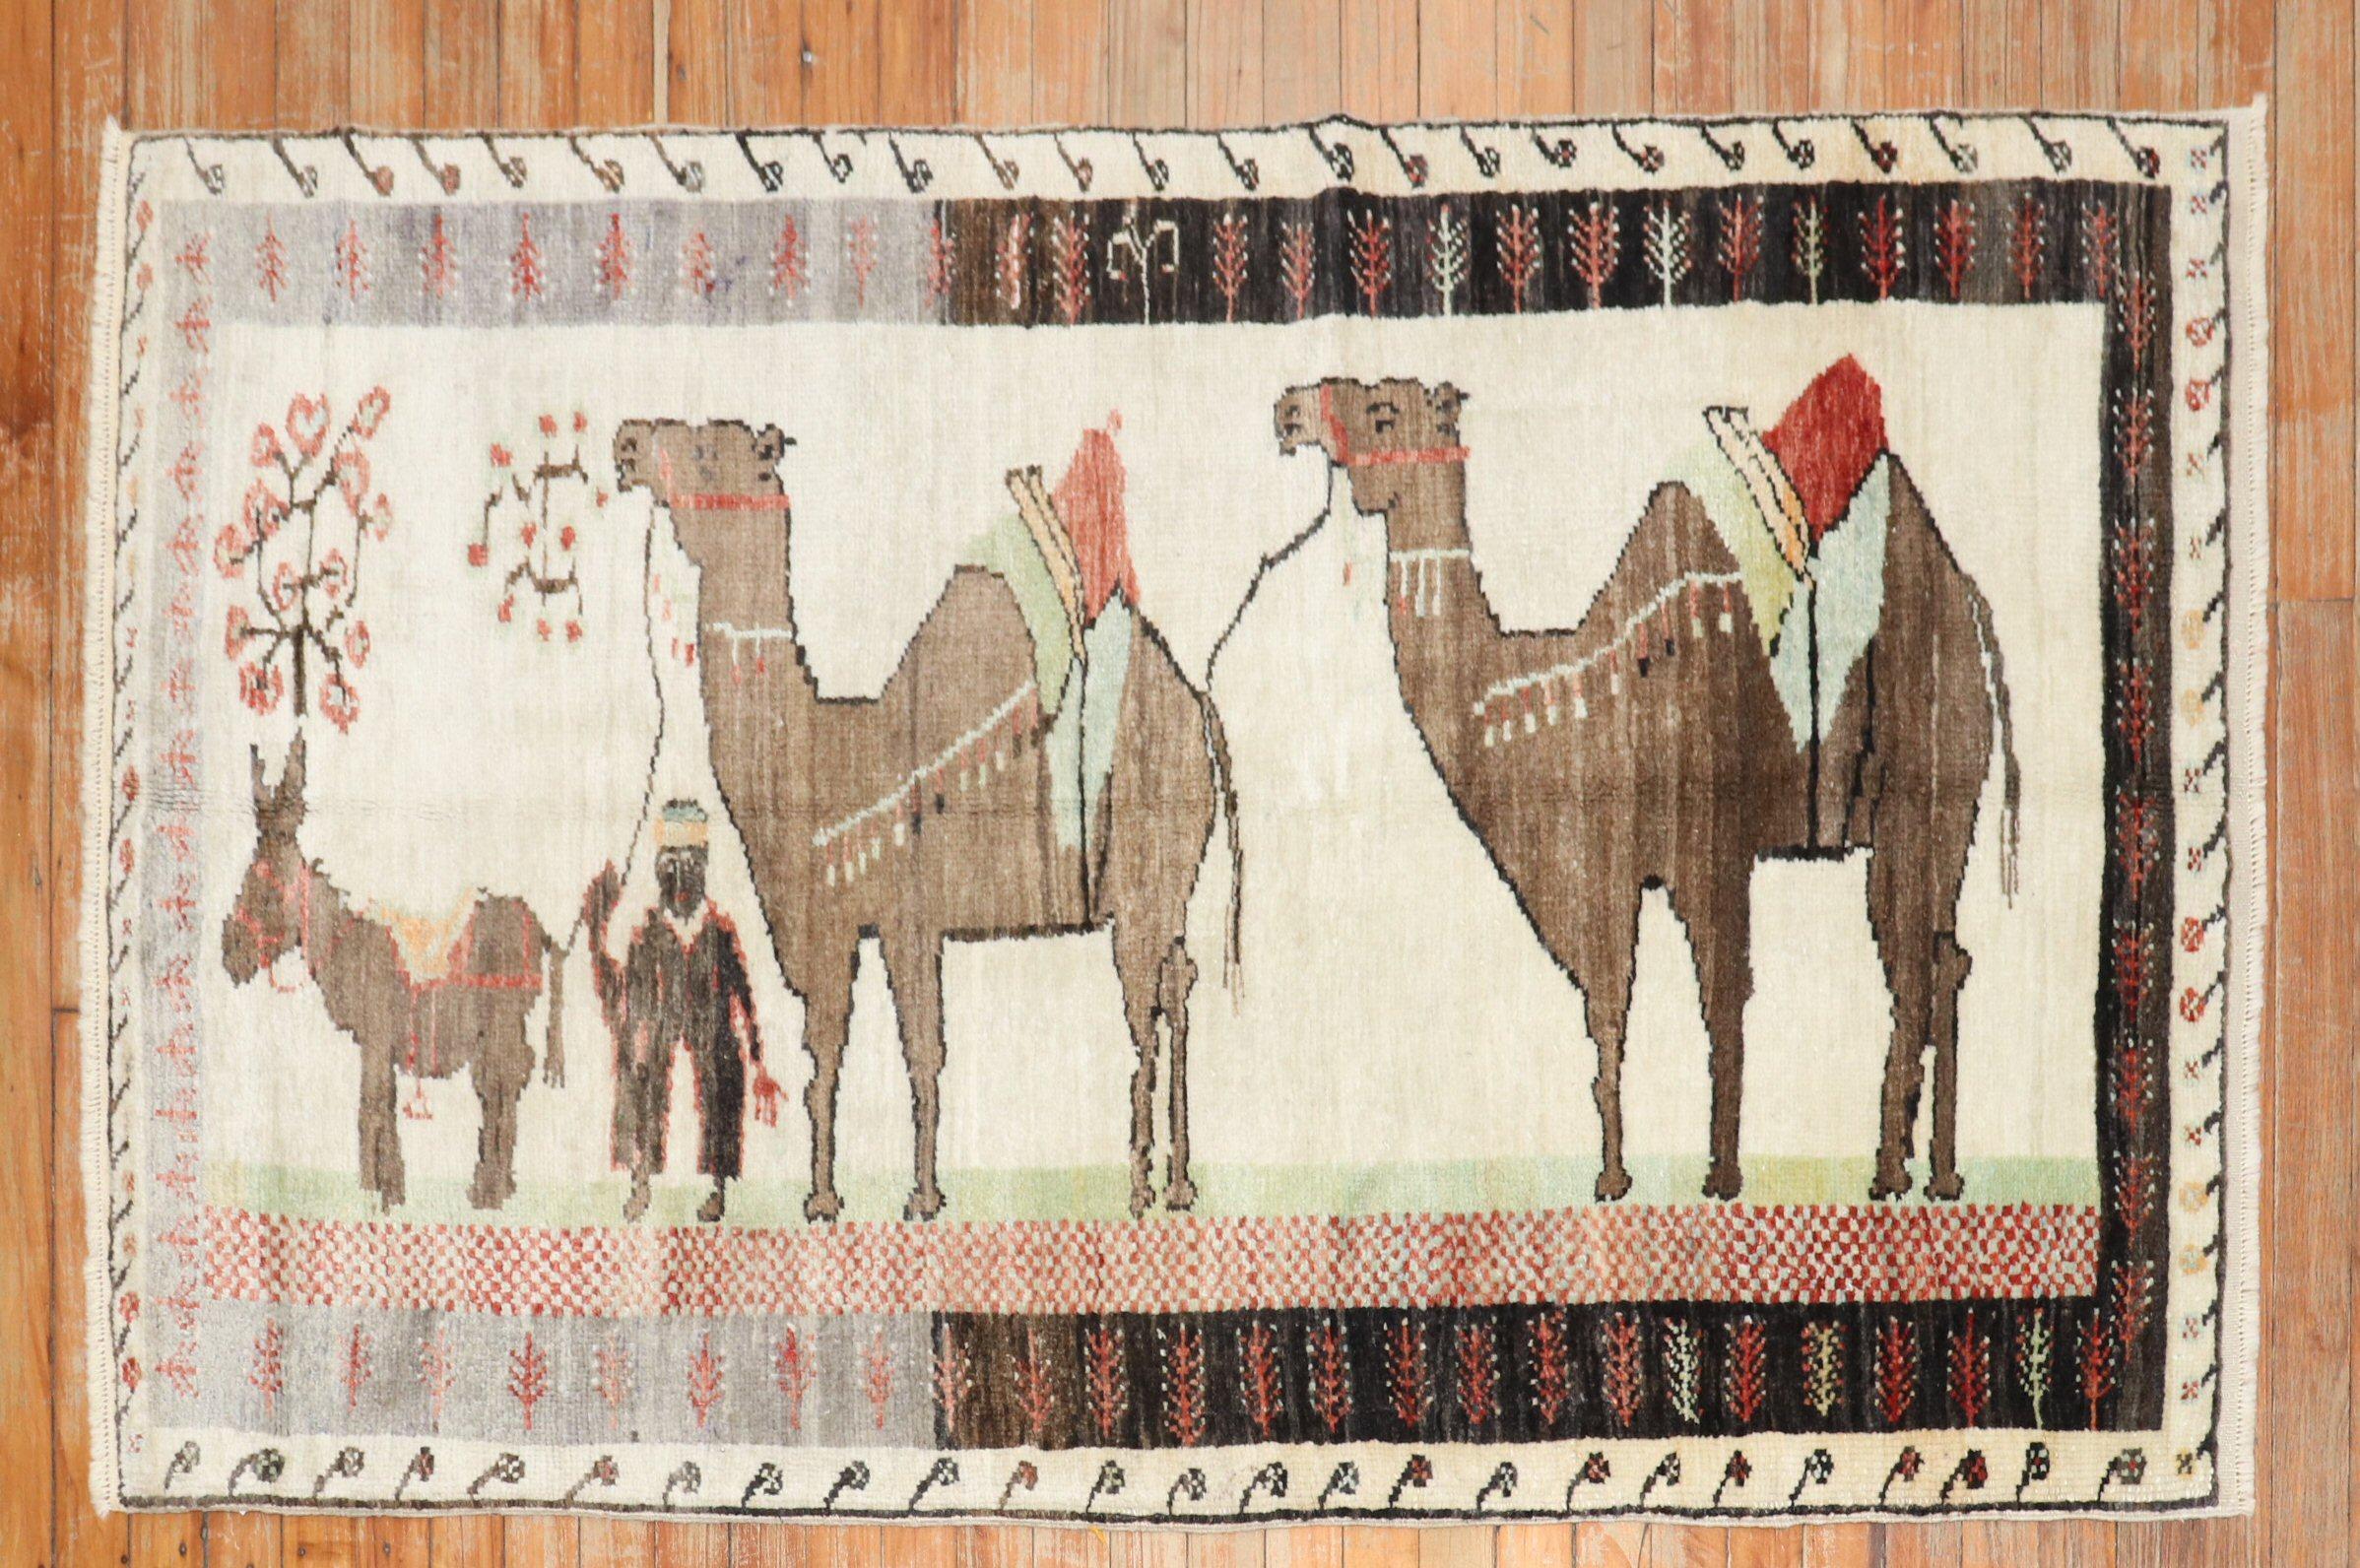 Mid 20th century colrufl Turkish rug depicting camel and donkeys on an ivory ground. The striation of colors on 1 end is referred to as abrash which is natural color variations found in some vintage and antique rugs from the 20th century

Size: